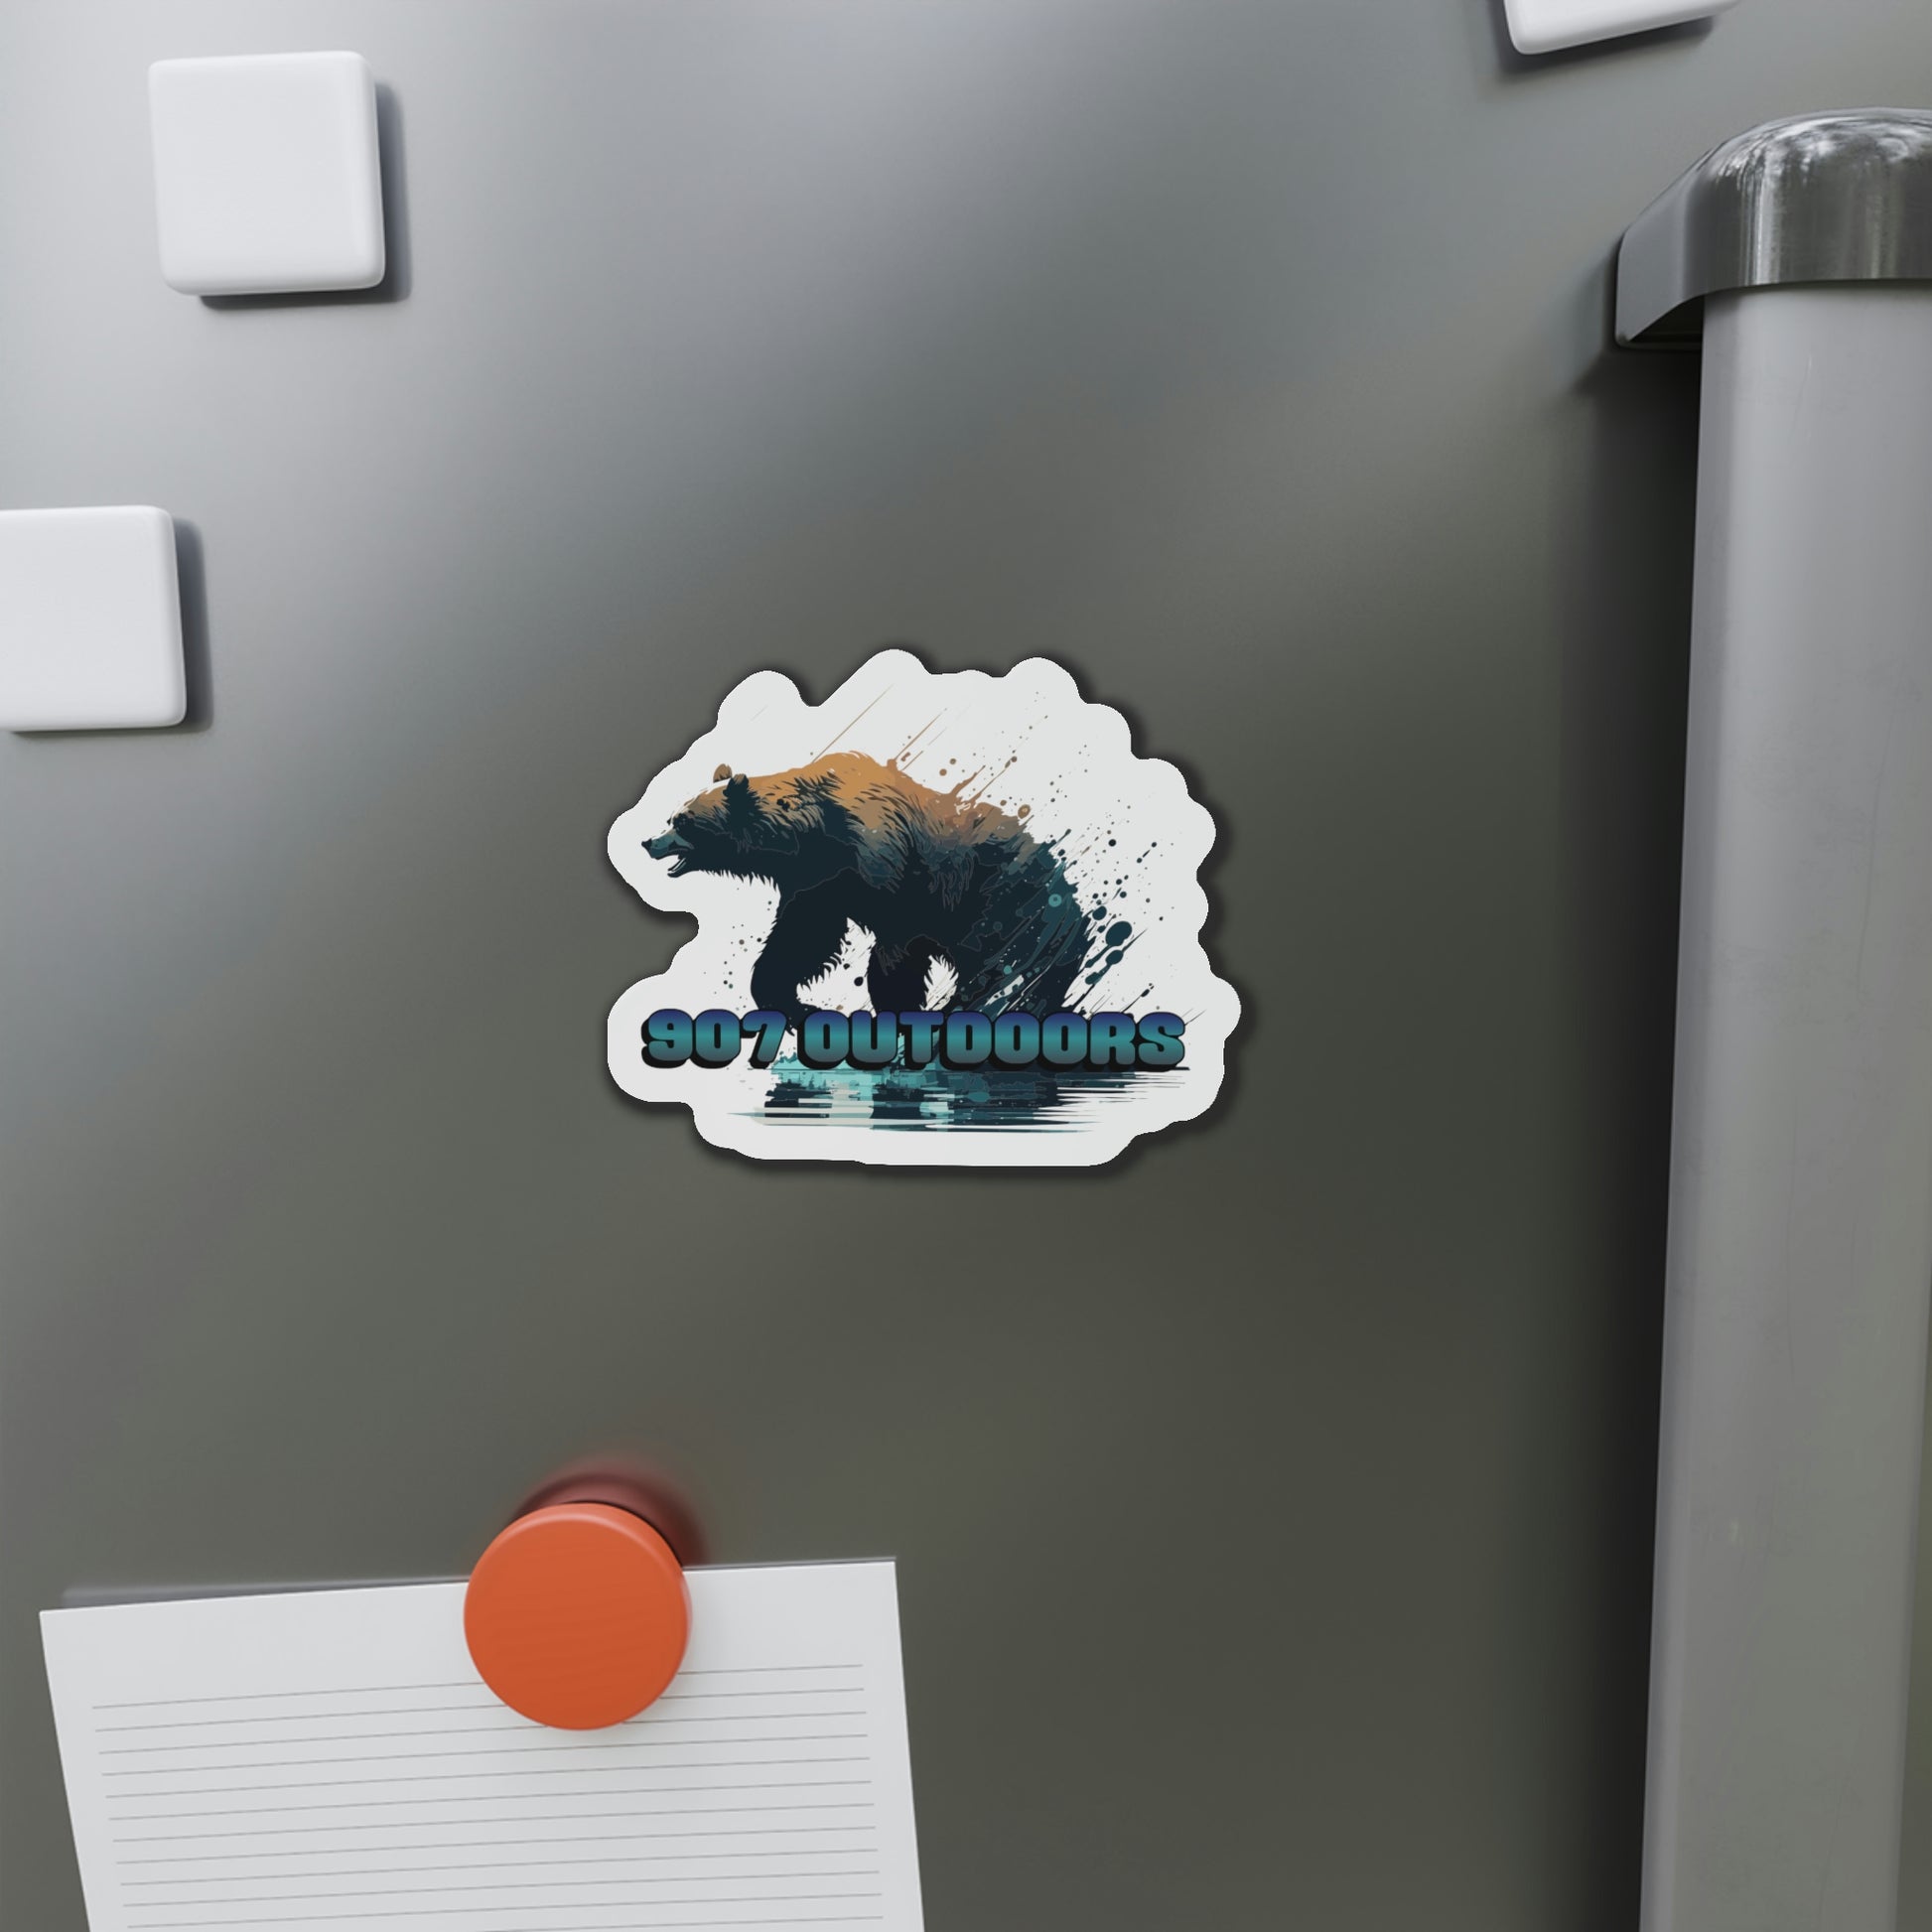 River Bear Die-Cut Magnets - 907Outdoors